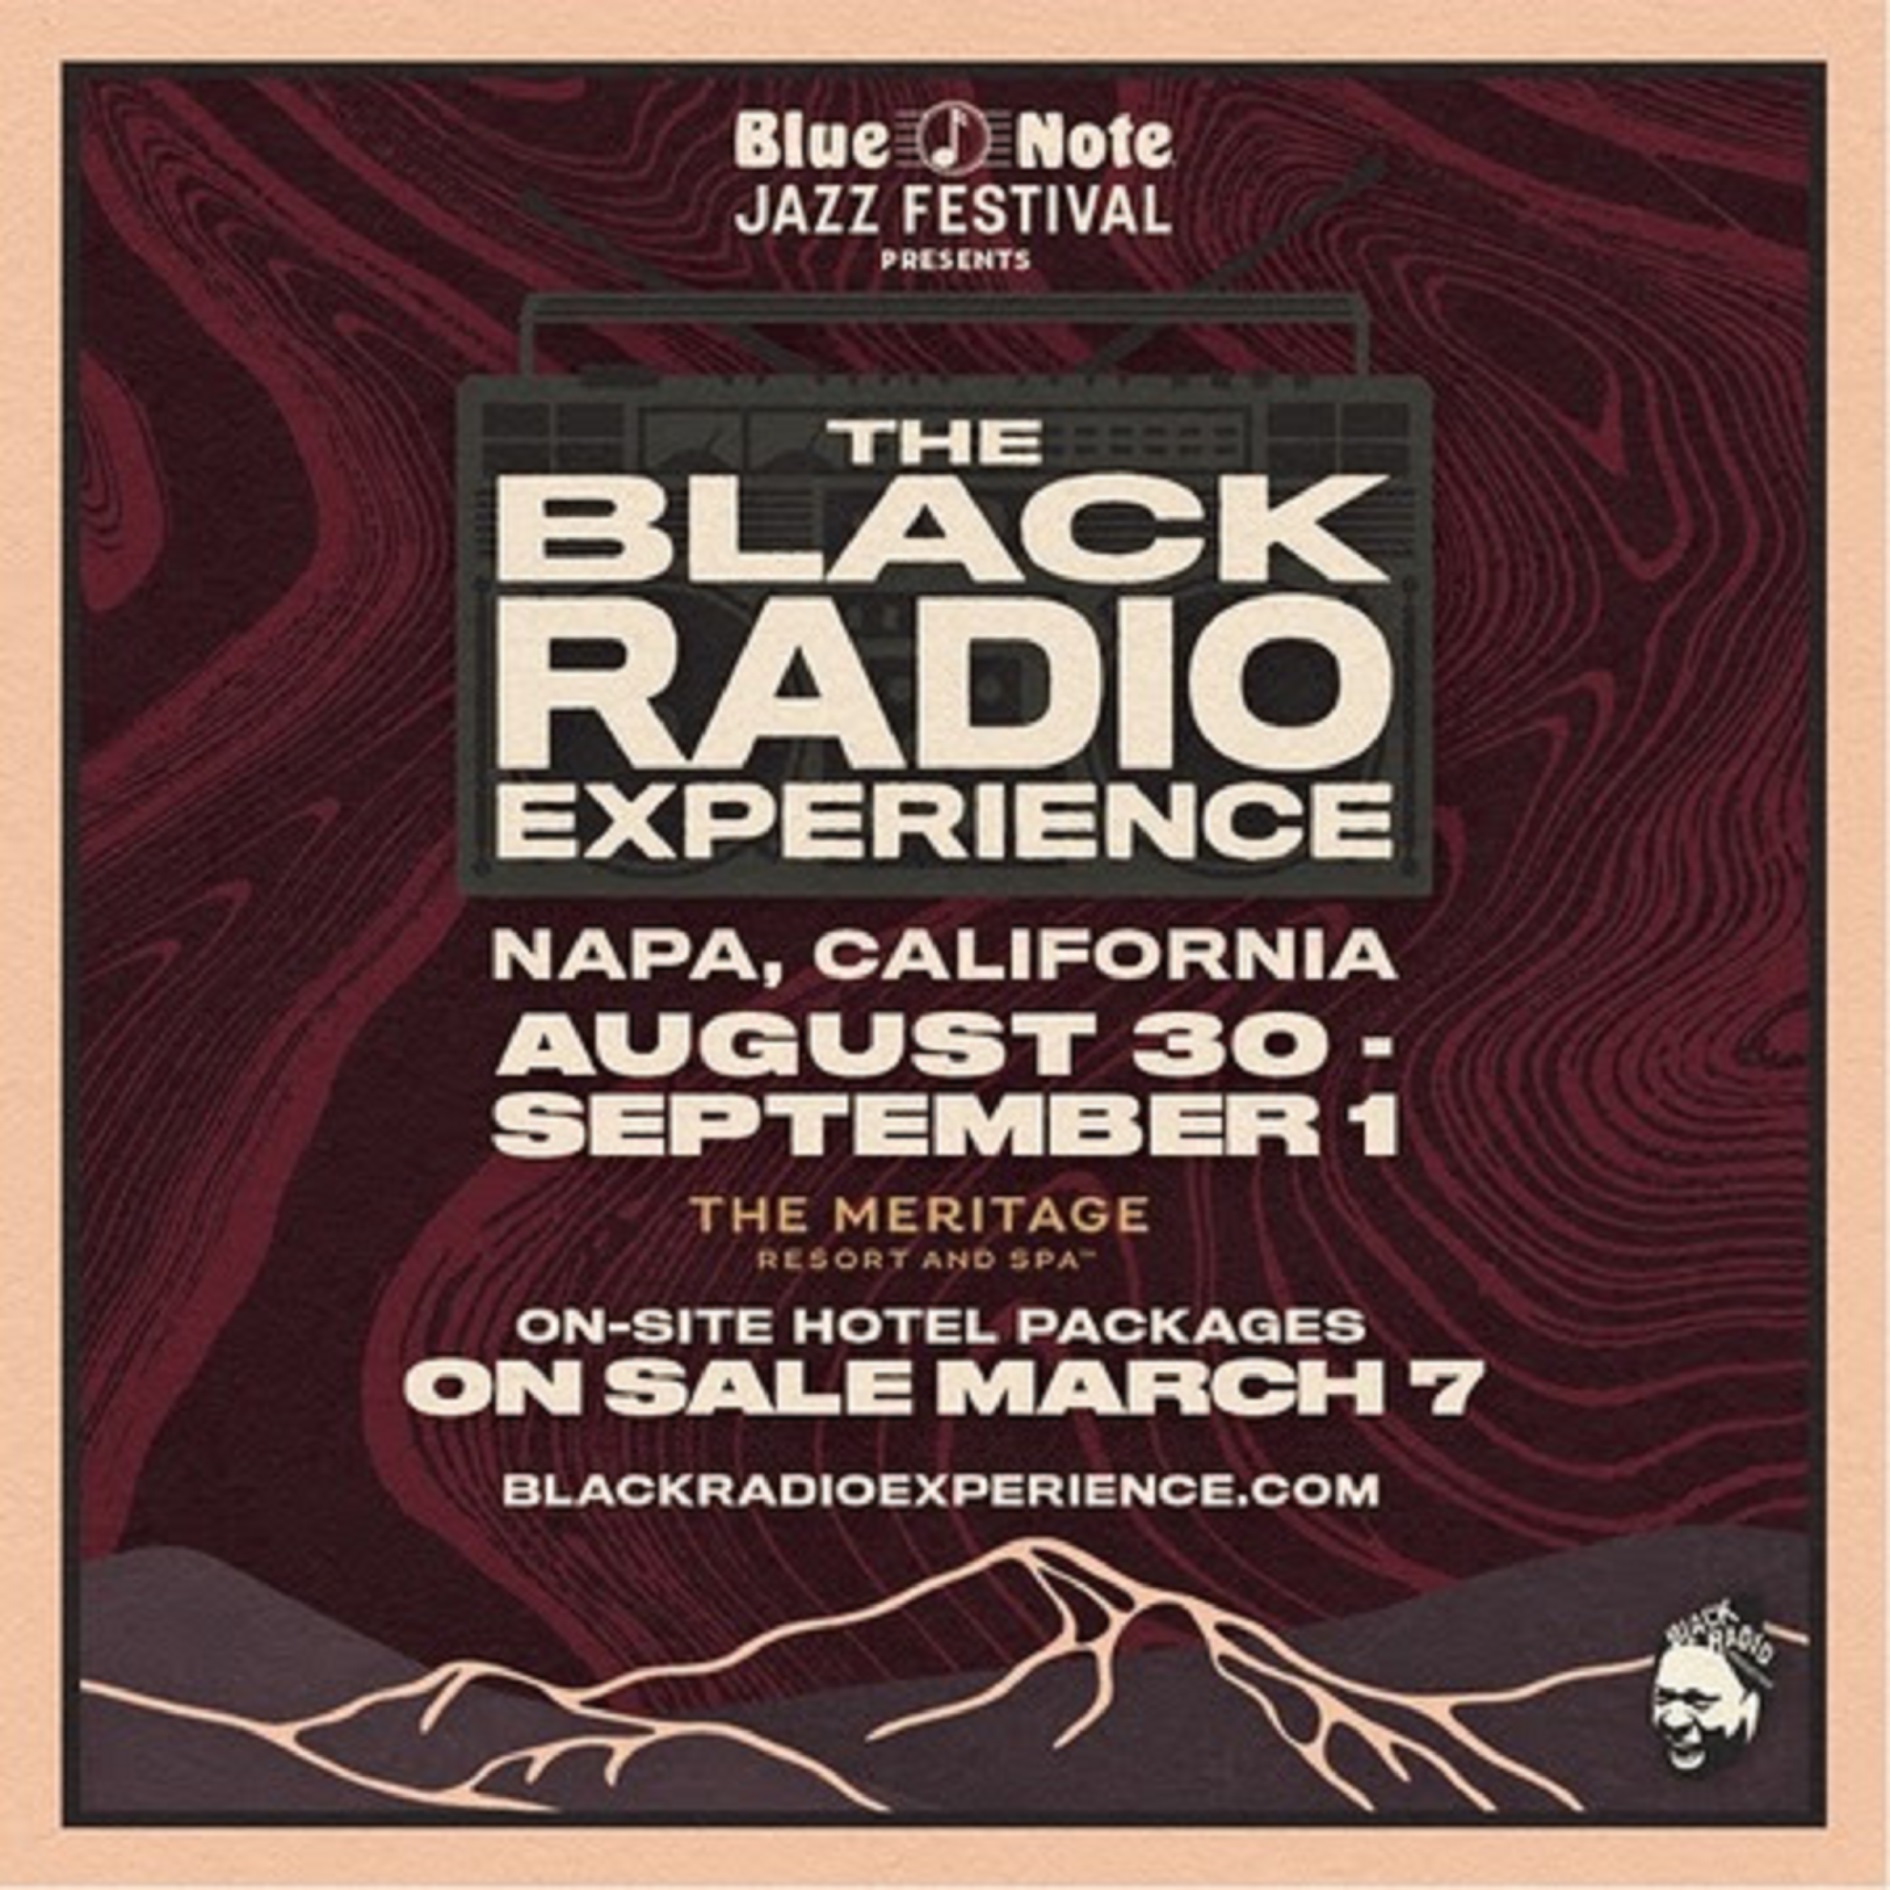 Blue Note Jazz Festival Napa Teams with Robert Glasper for the Black Radio Experience Aug 30-Sept 1 at the Meritage Resort and Spa